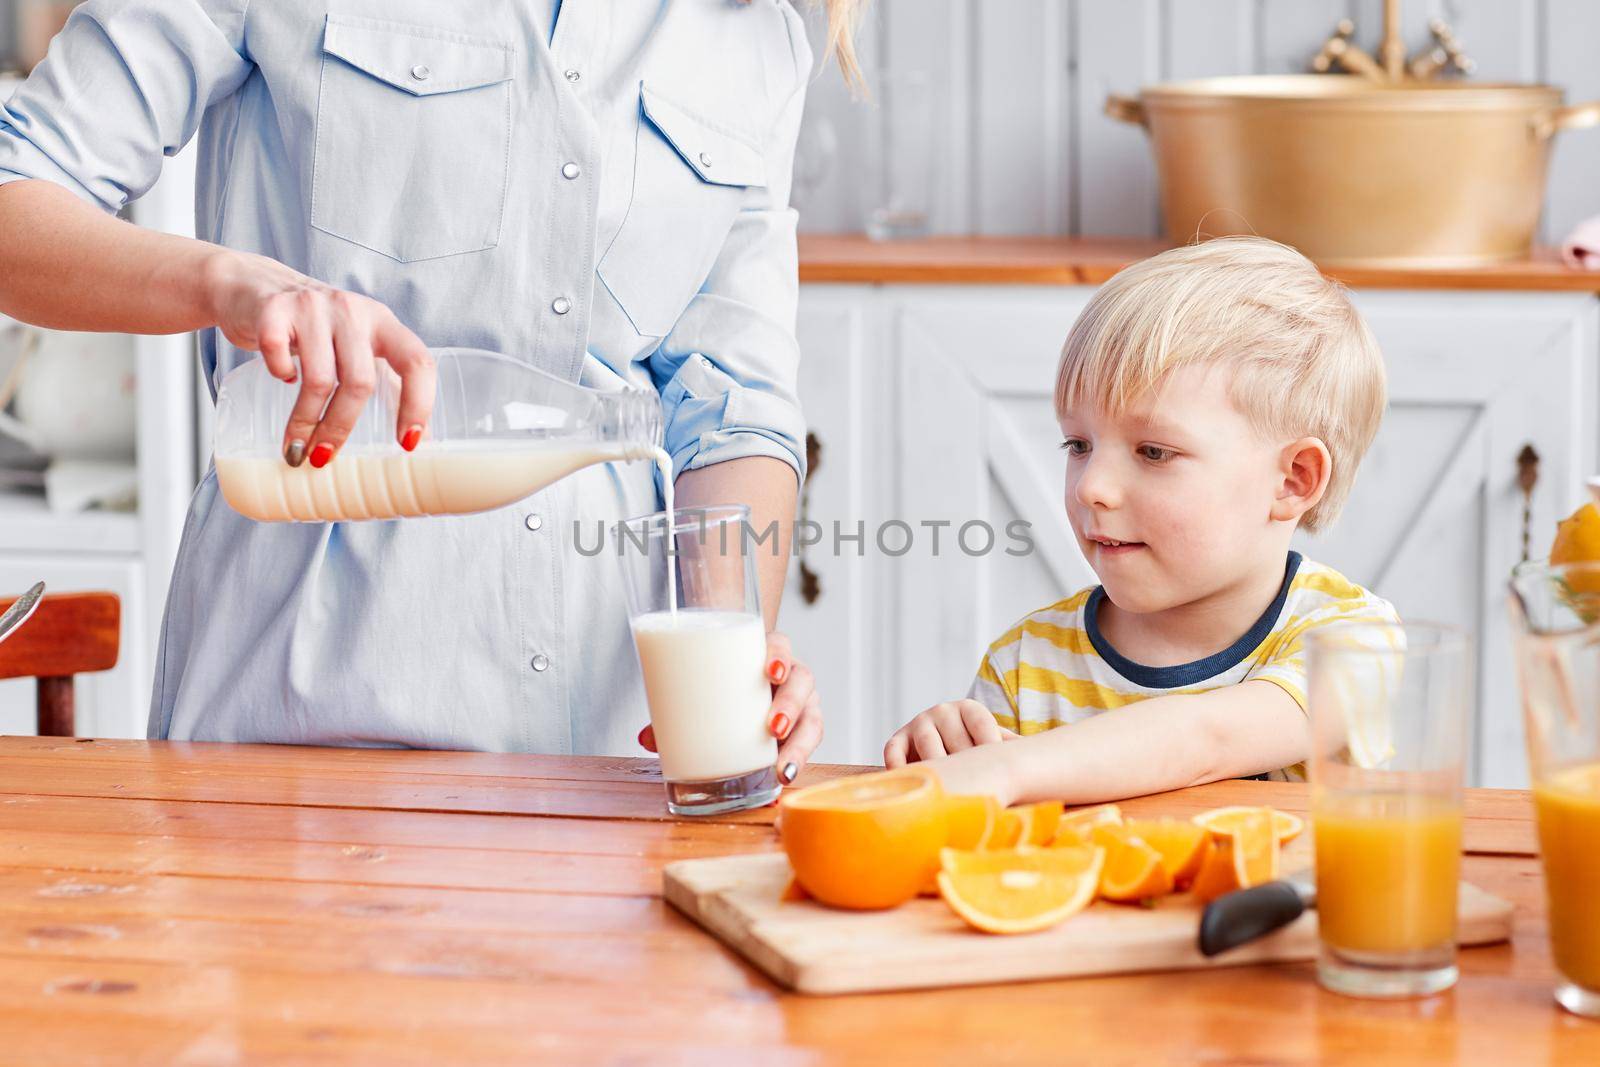 Mother and son are smiling while having a breakfast in kitchen. Mom is pouring milk into glass